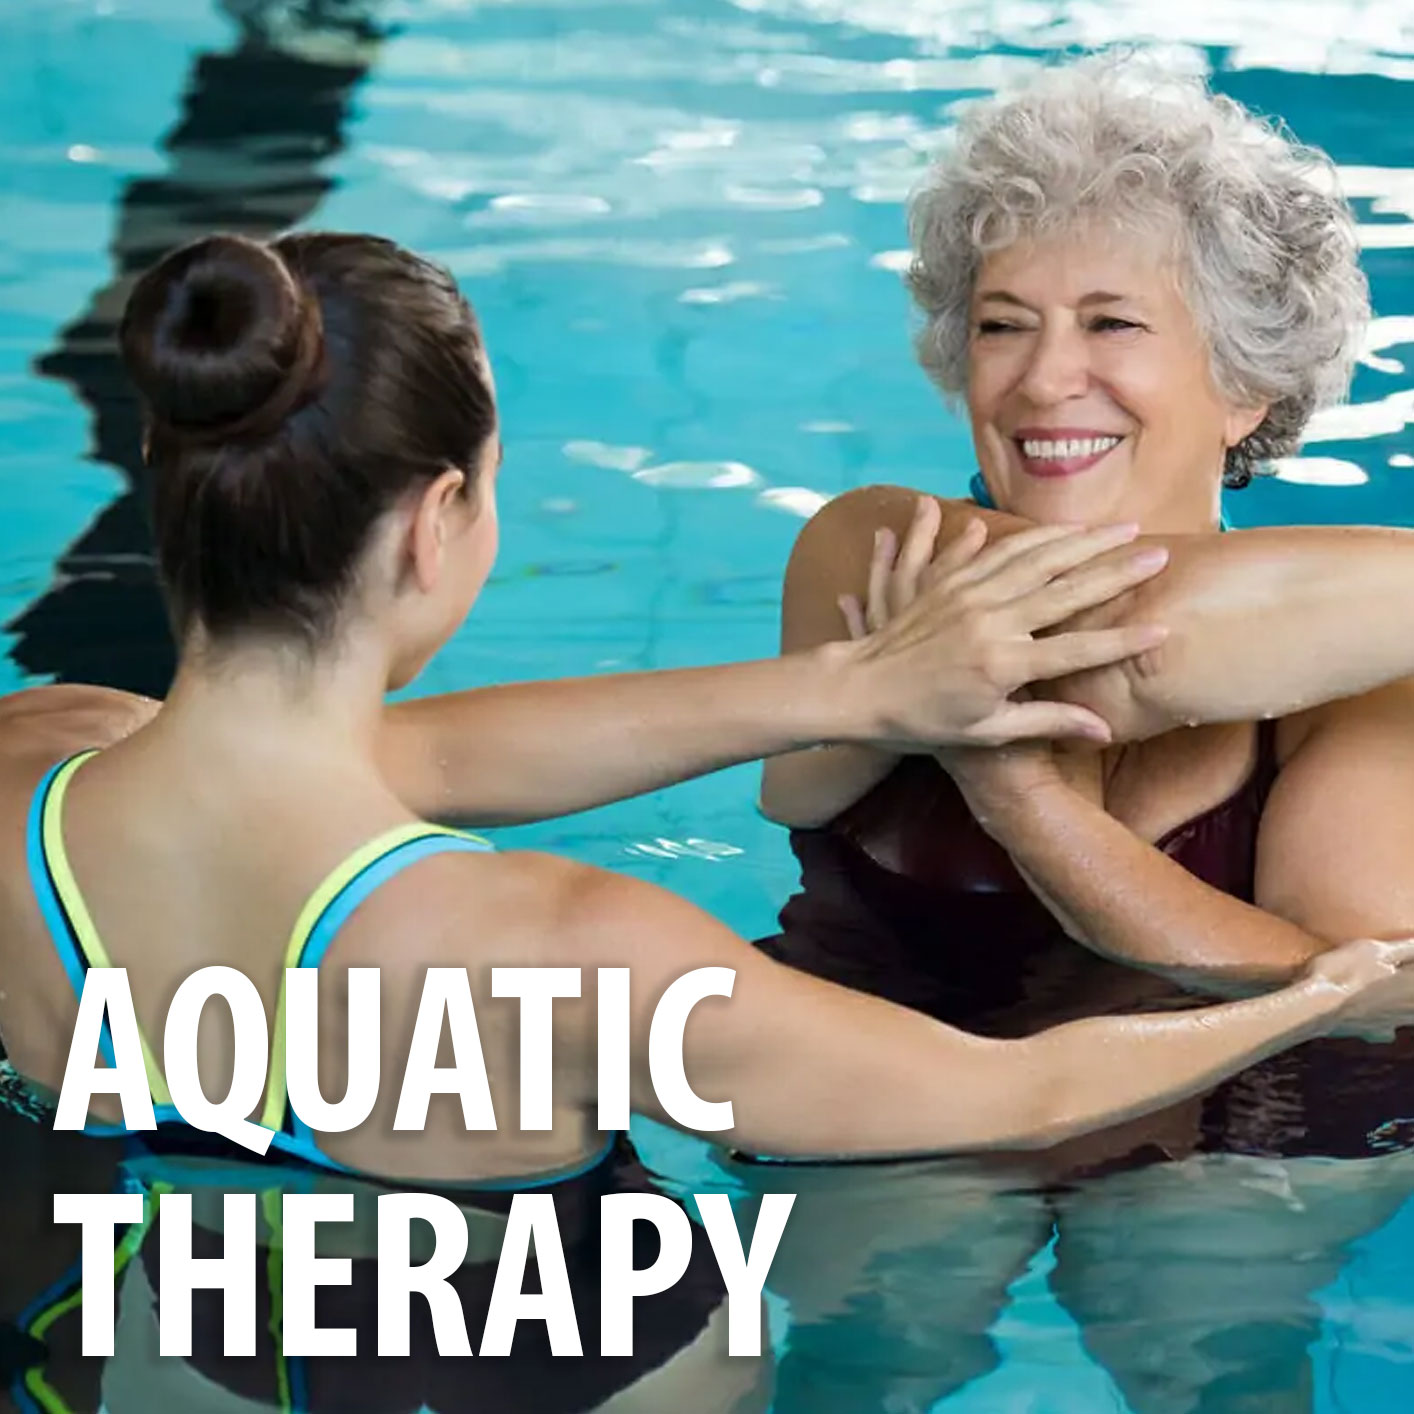 Patient receiving aquatic therapy from physical therapist